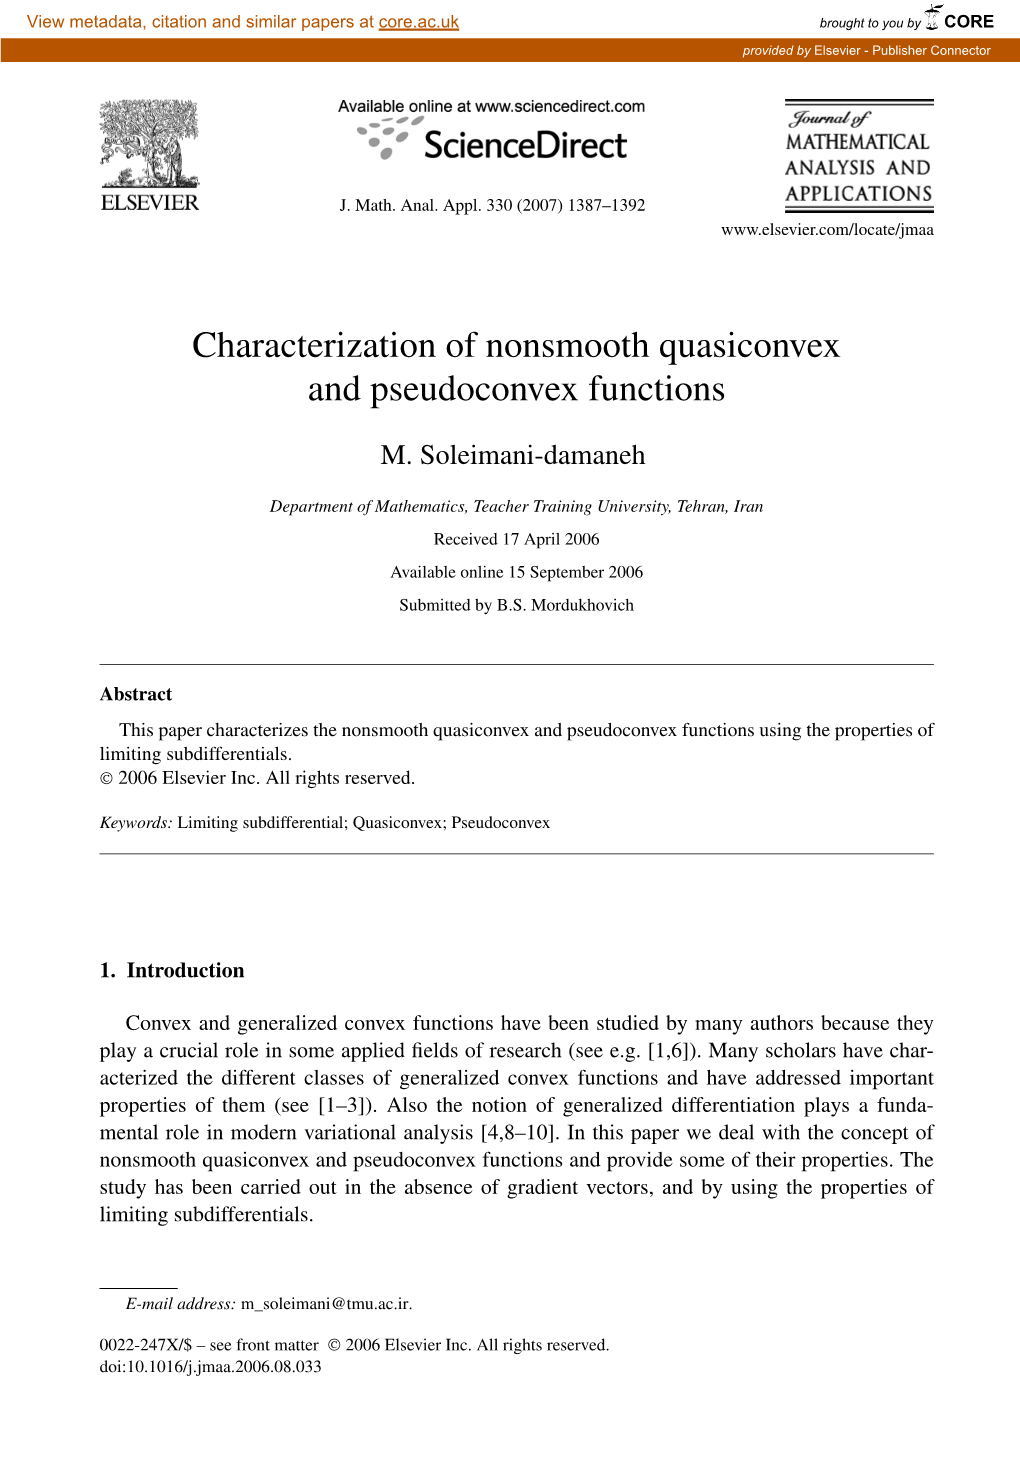 Characterization of Nonsmooth Quasiconvex and Pseudoconvex Functions